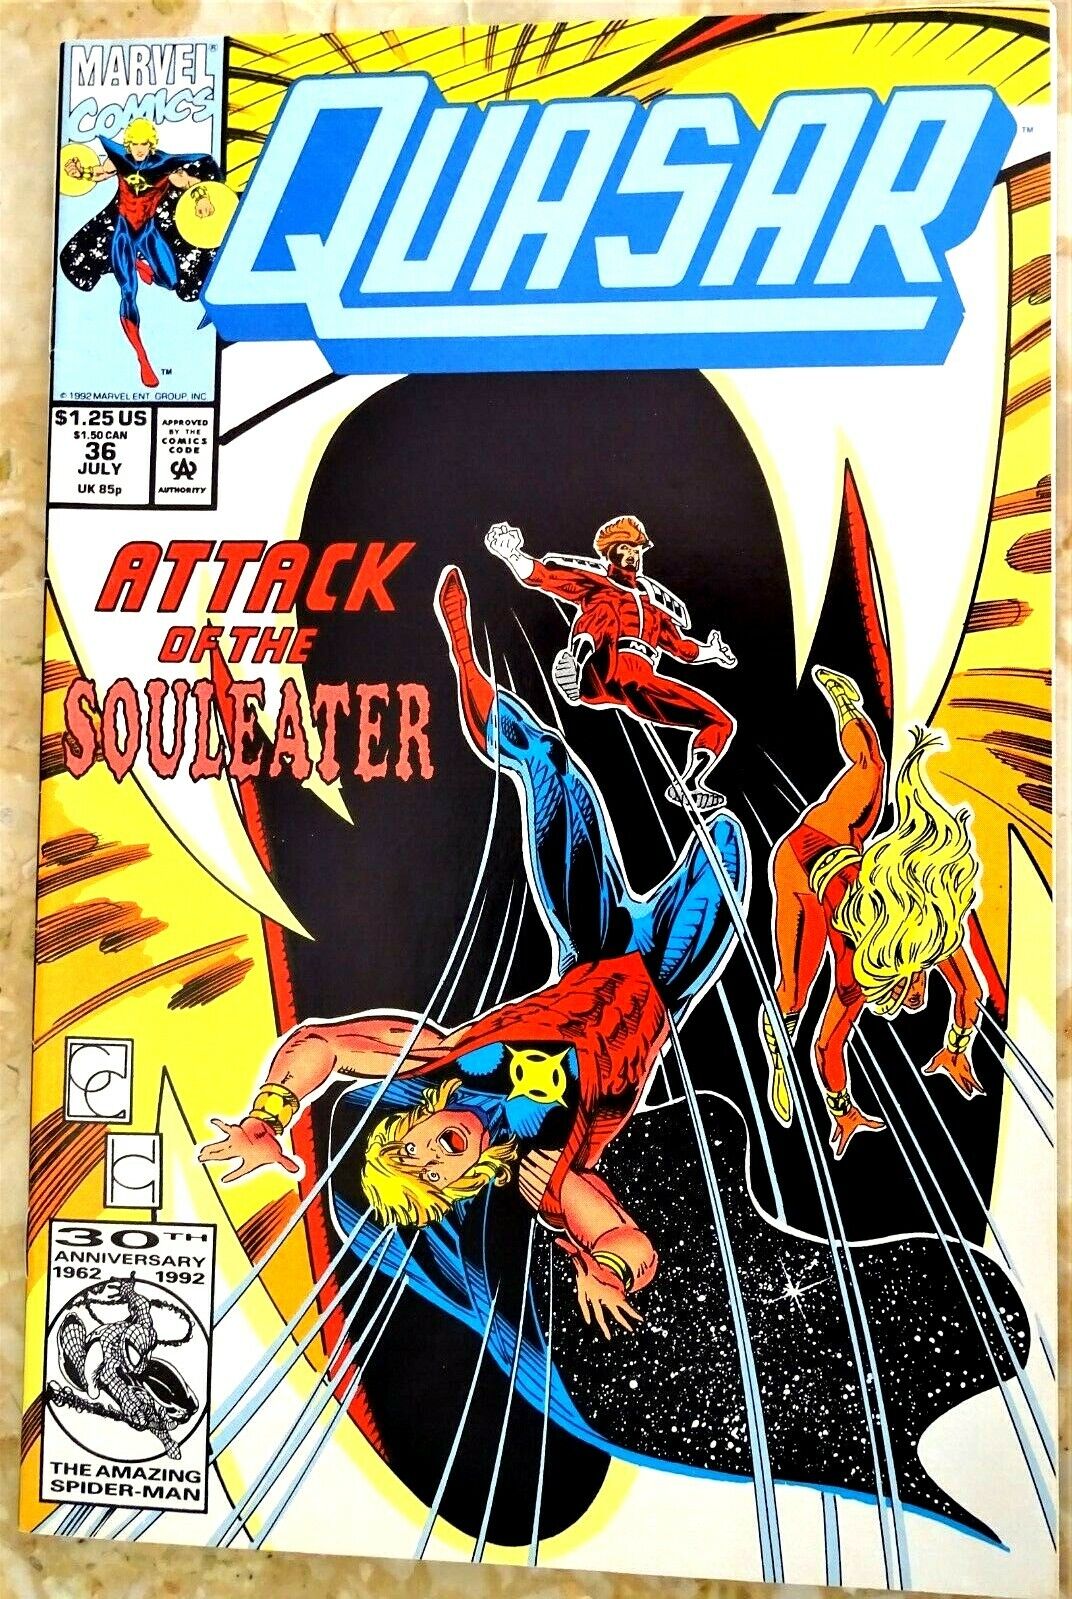 Marvel,#36 'Quasar' Attack of the Souleater